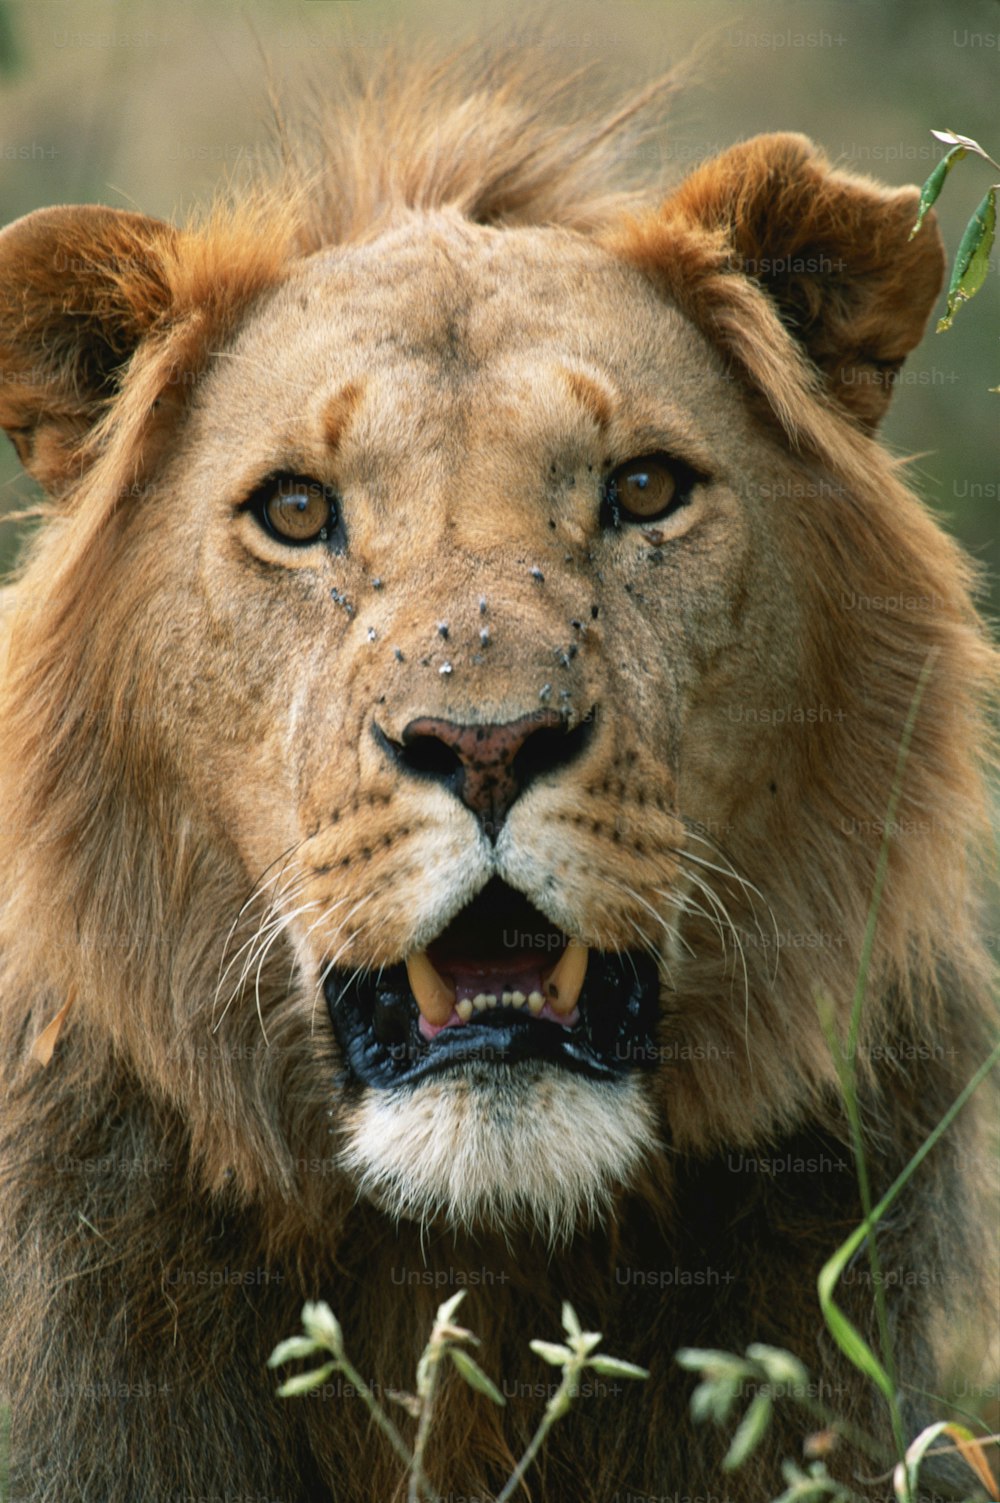 a close up of a lion in a field